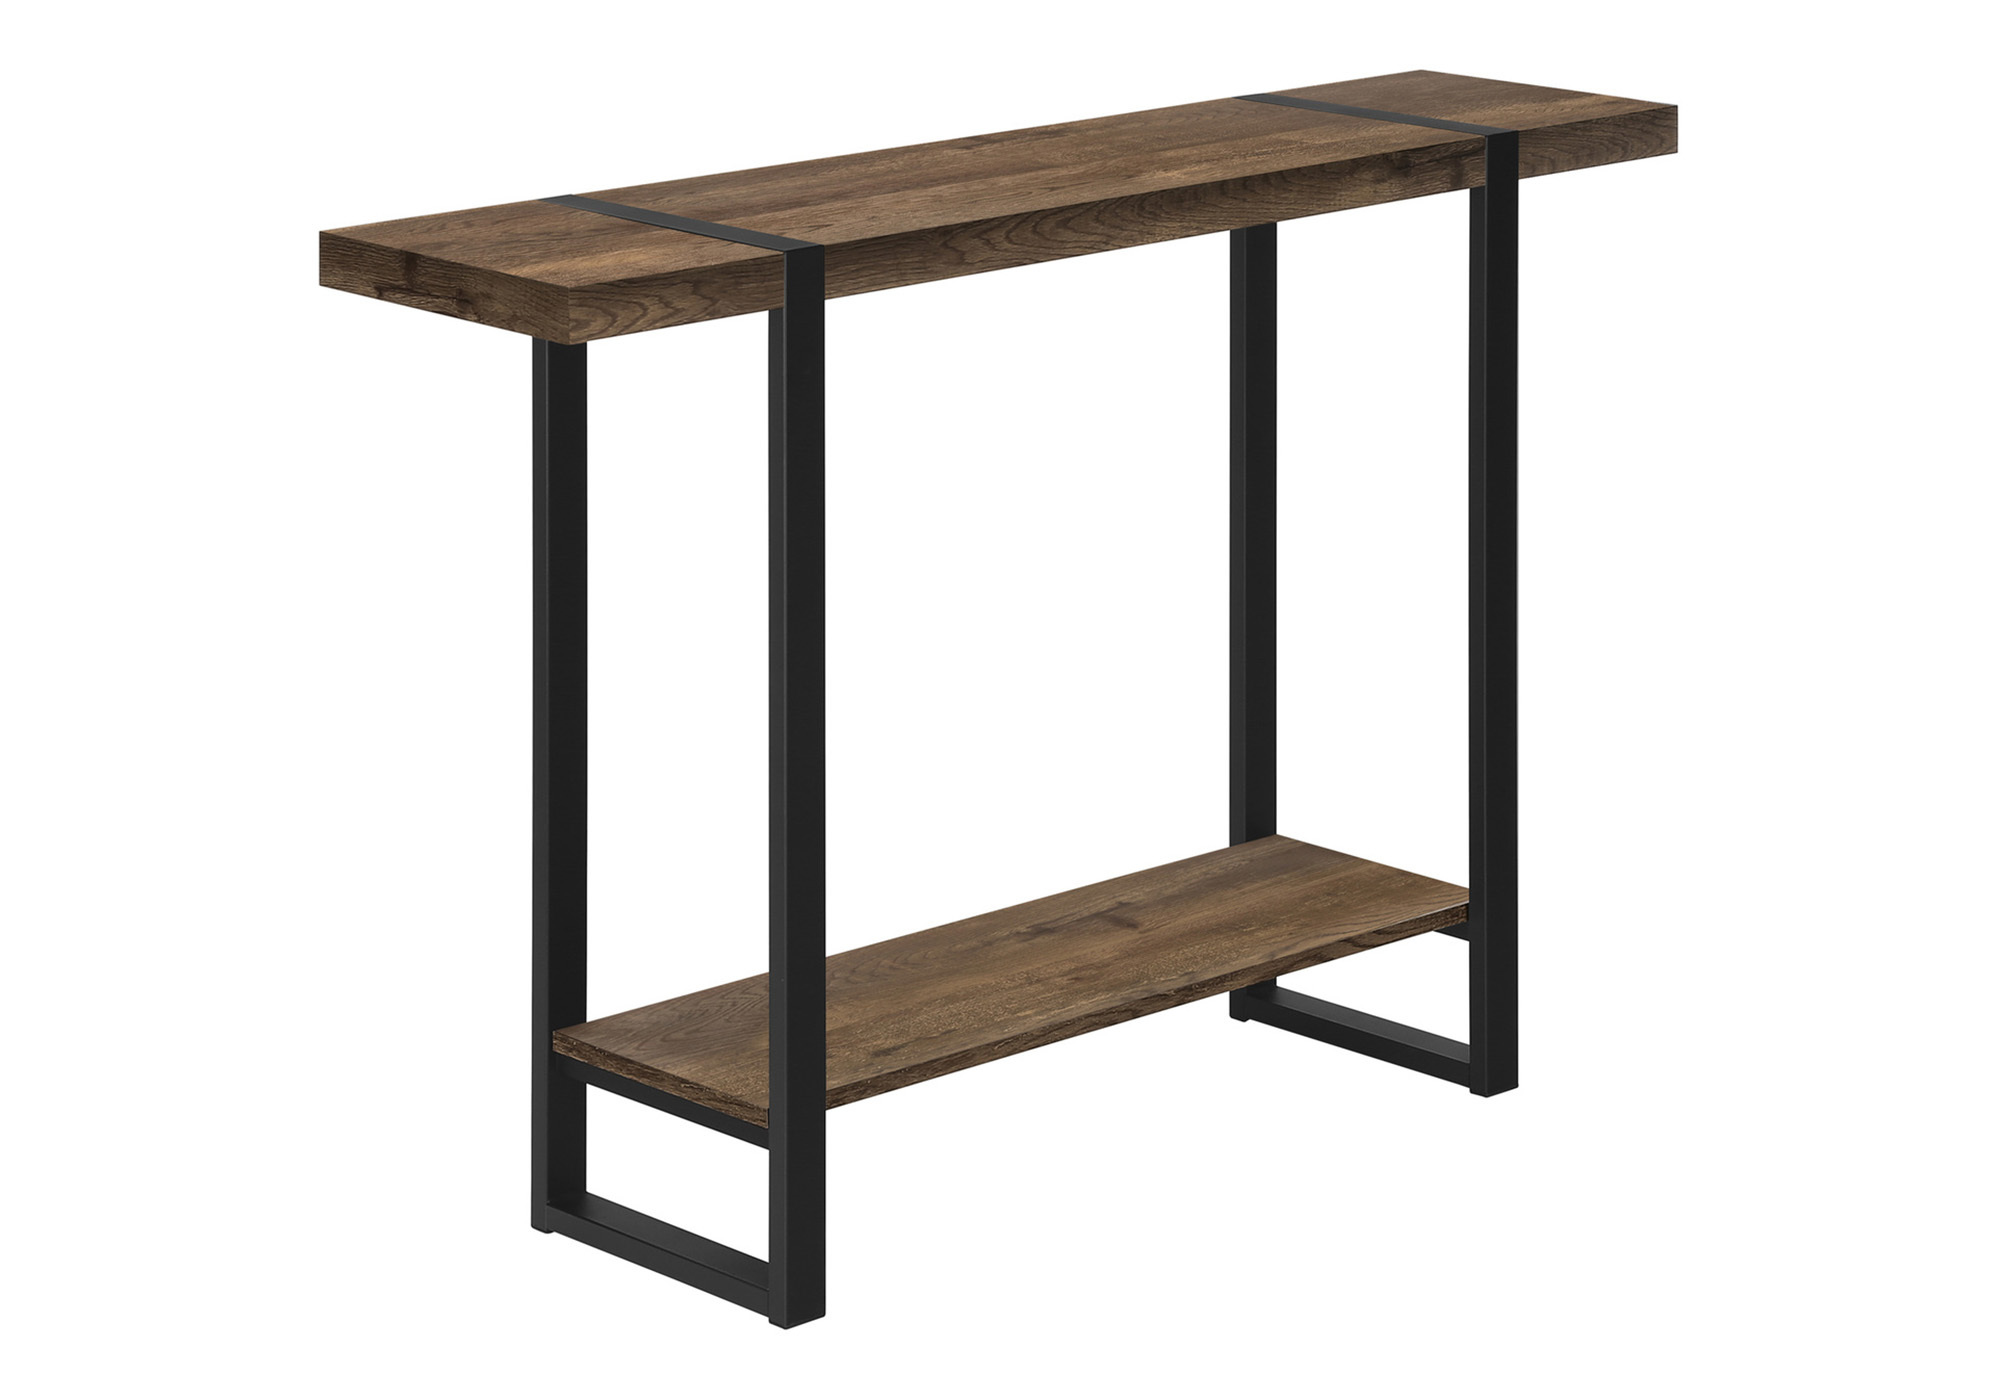 ACCENT TABLE - 48"L / BROWN RECLAIMED WOOD-LOOK / BLACK 